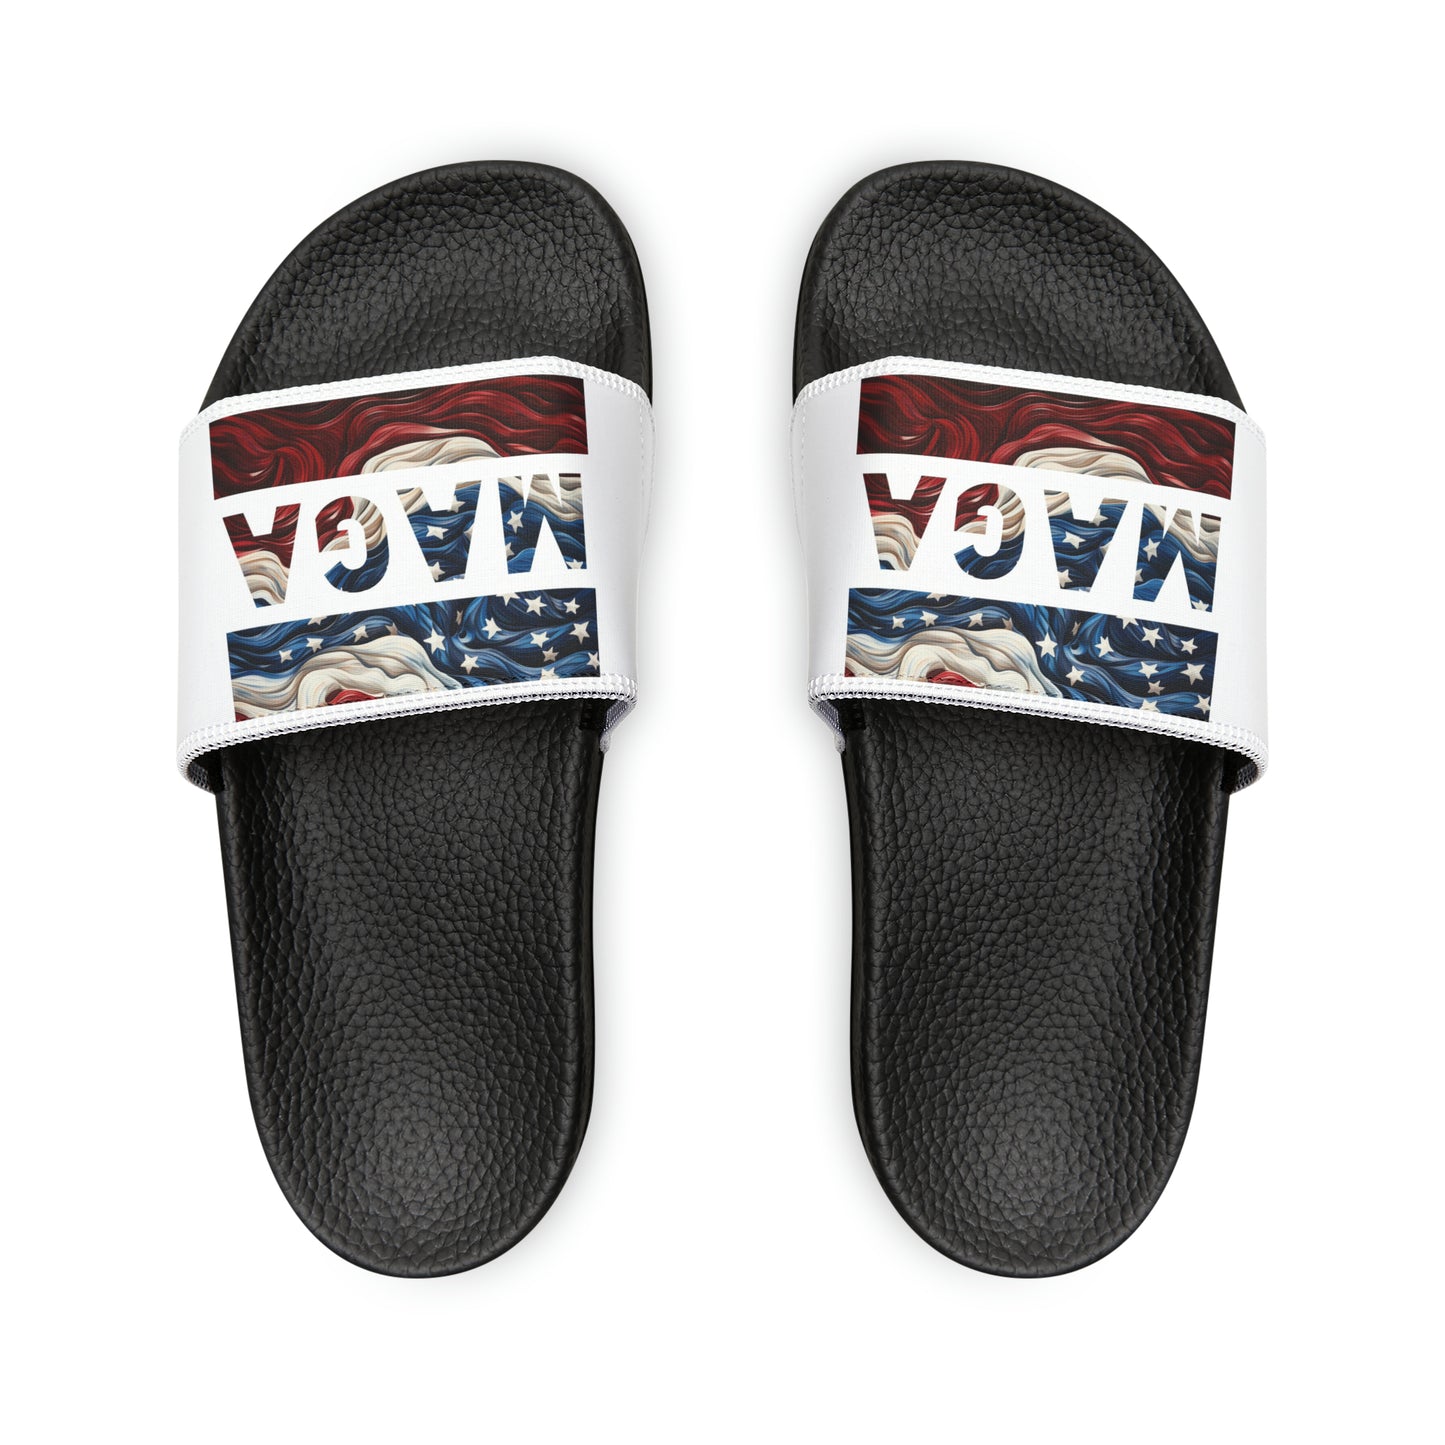 Men's MAGA Red White and Blue Trump Comfy PU Slide Sandals